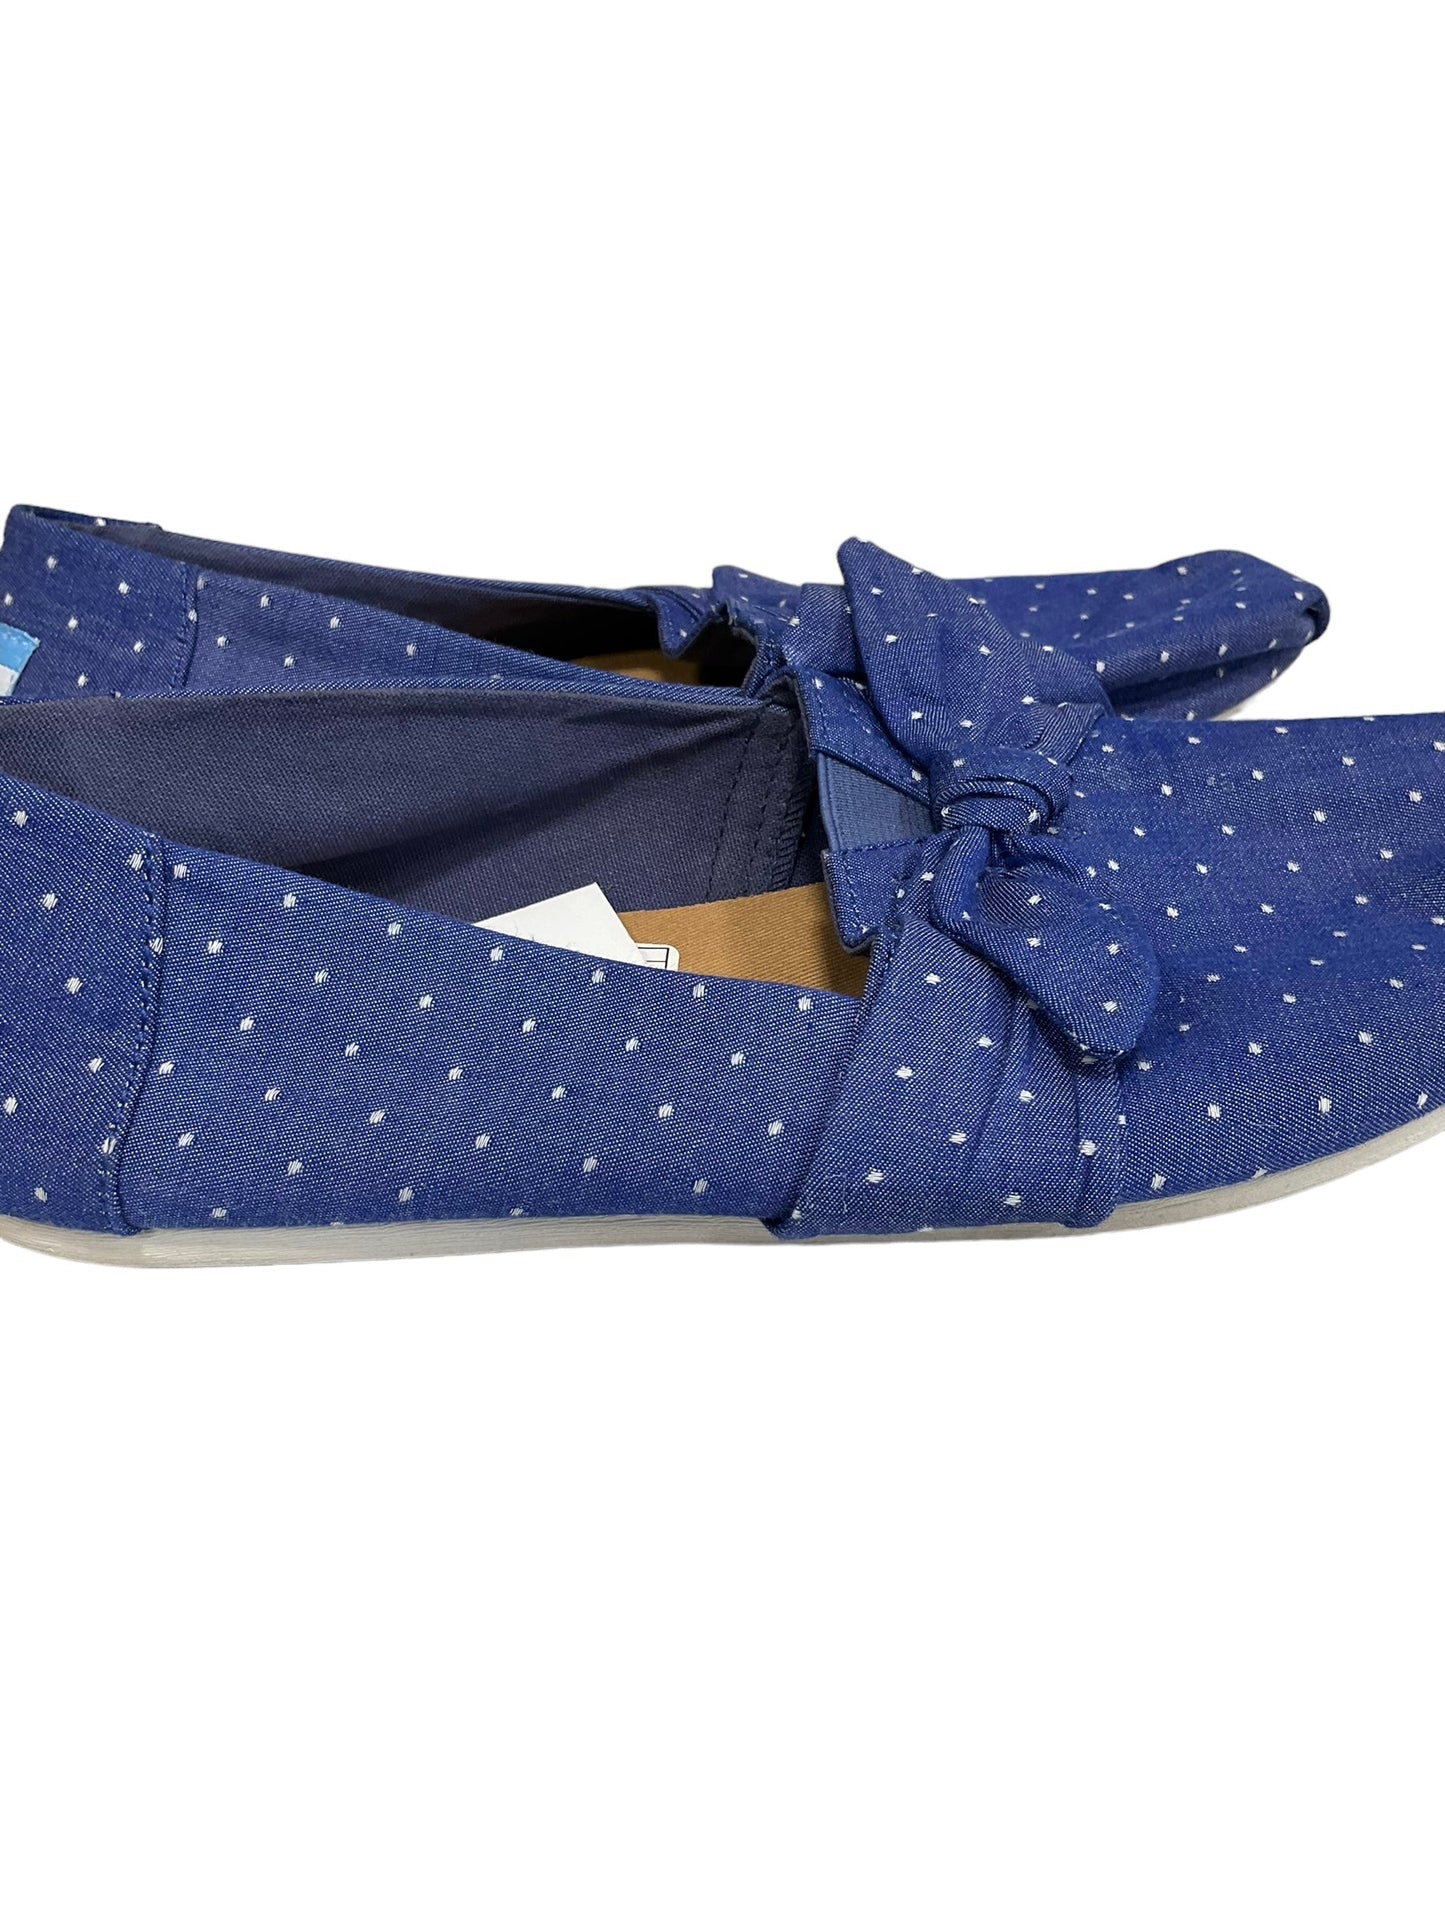 Shoes Flats Boat By Toms  Size: 9.5